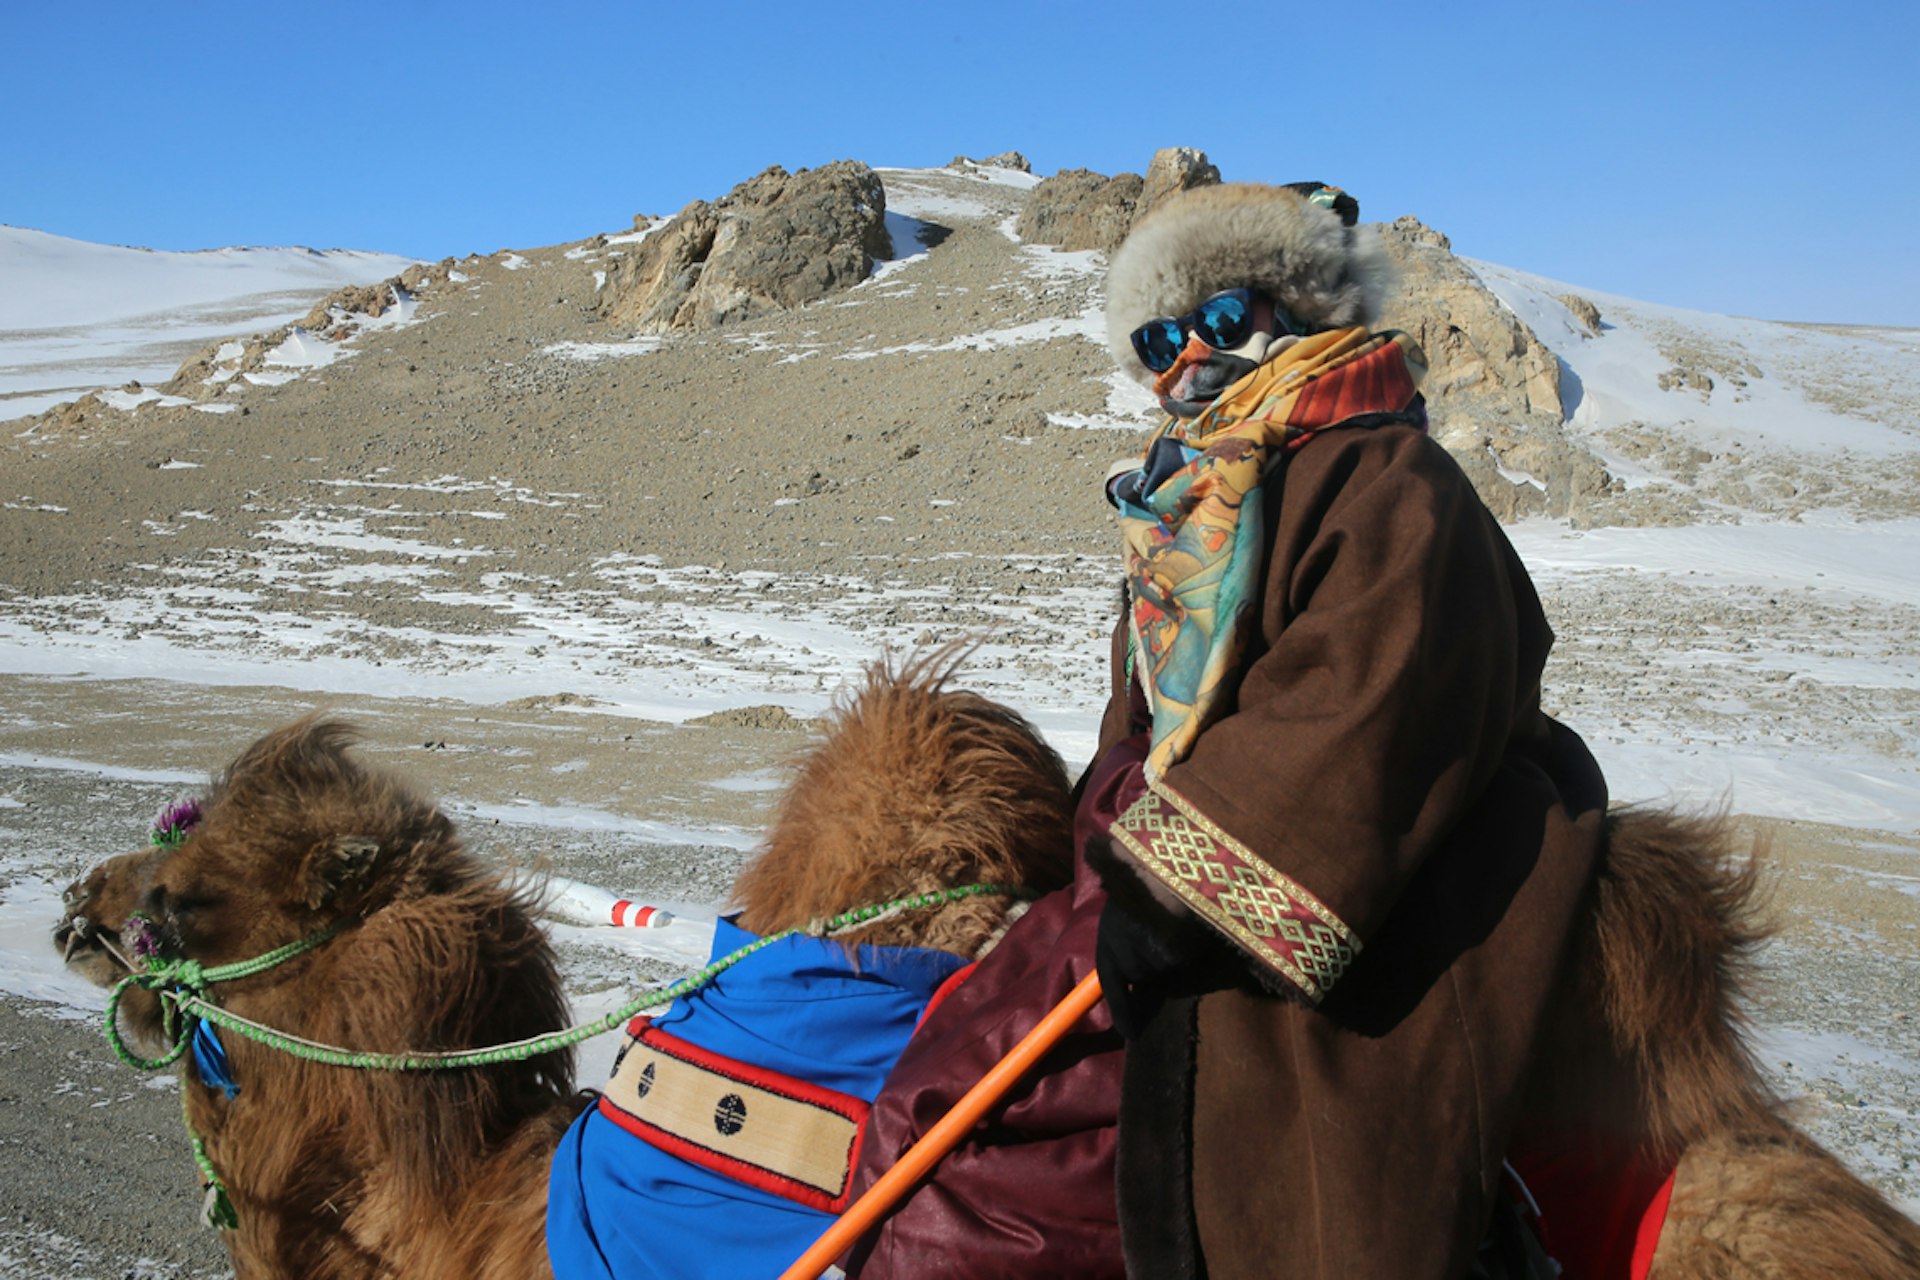 The adventurer trekking from Mongolia to London by camel